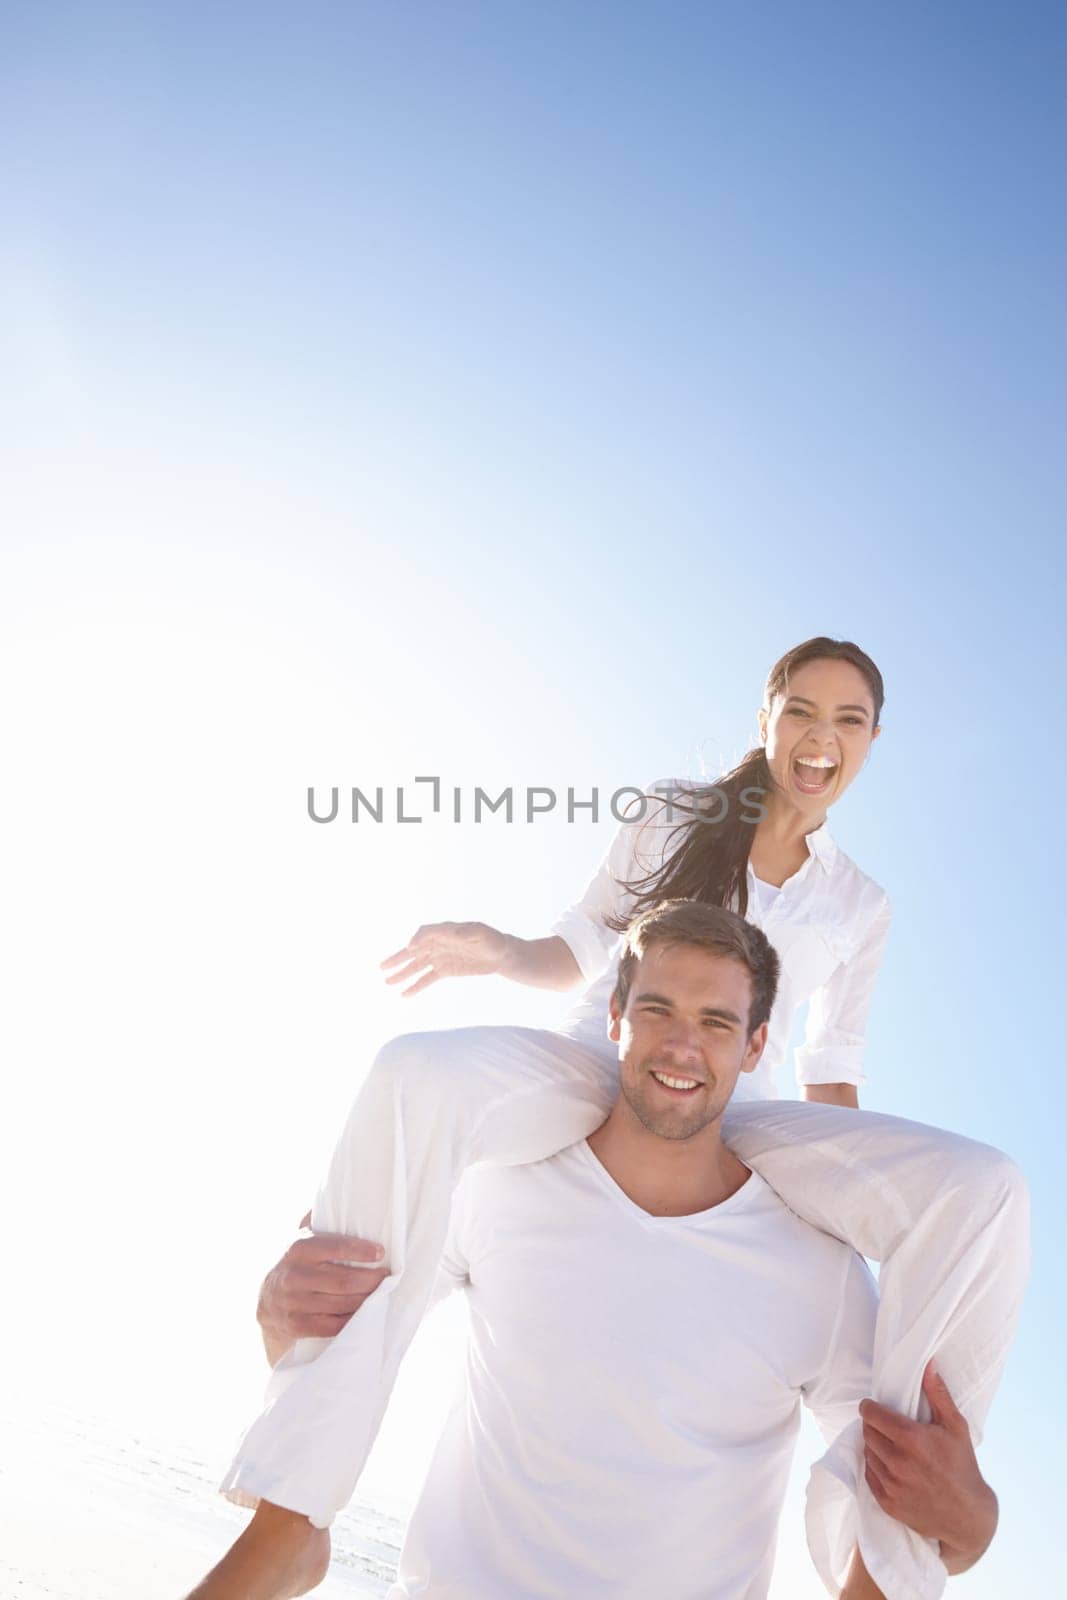 Man carrying woman, couple and outdoor with love, marriage and excited with vacation and bonding together. Portrait, park and people with fun and cheerful with romance and relationship with holiday.